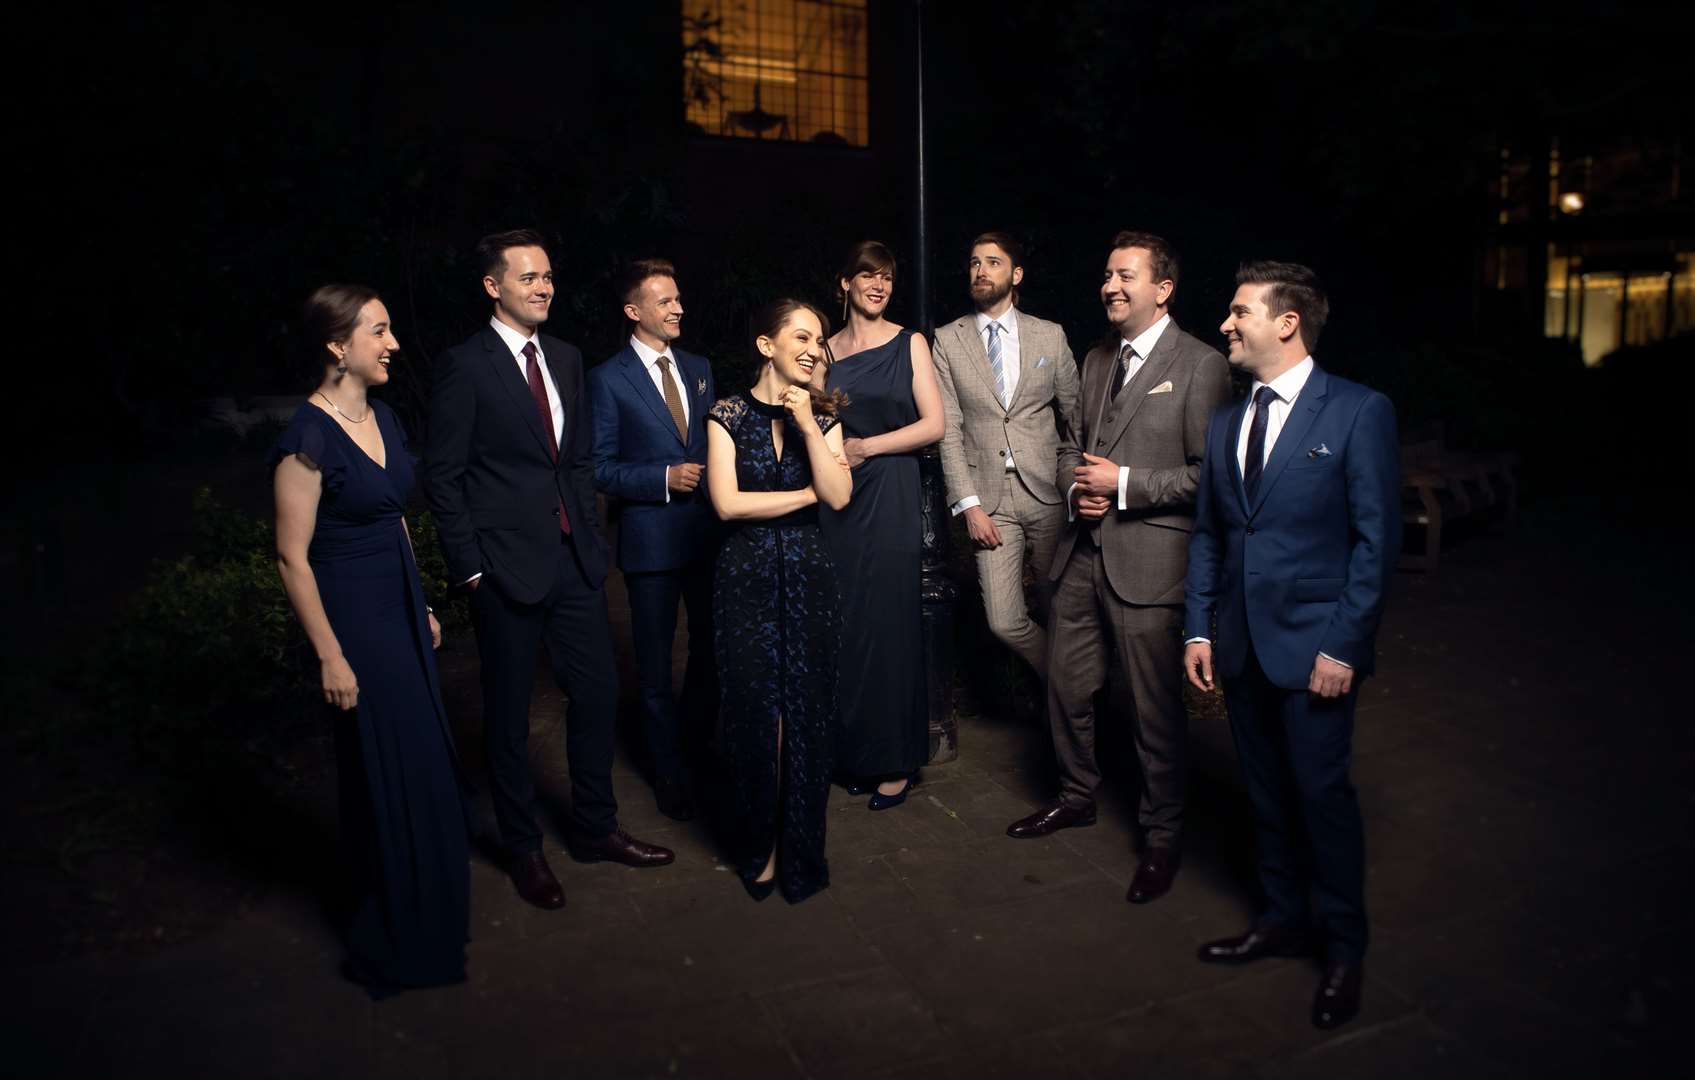 Acapella group VOCES8 will be at the festival this year. Picture: Supplied by JAM on the Marsh